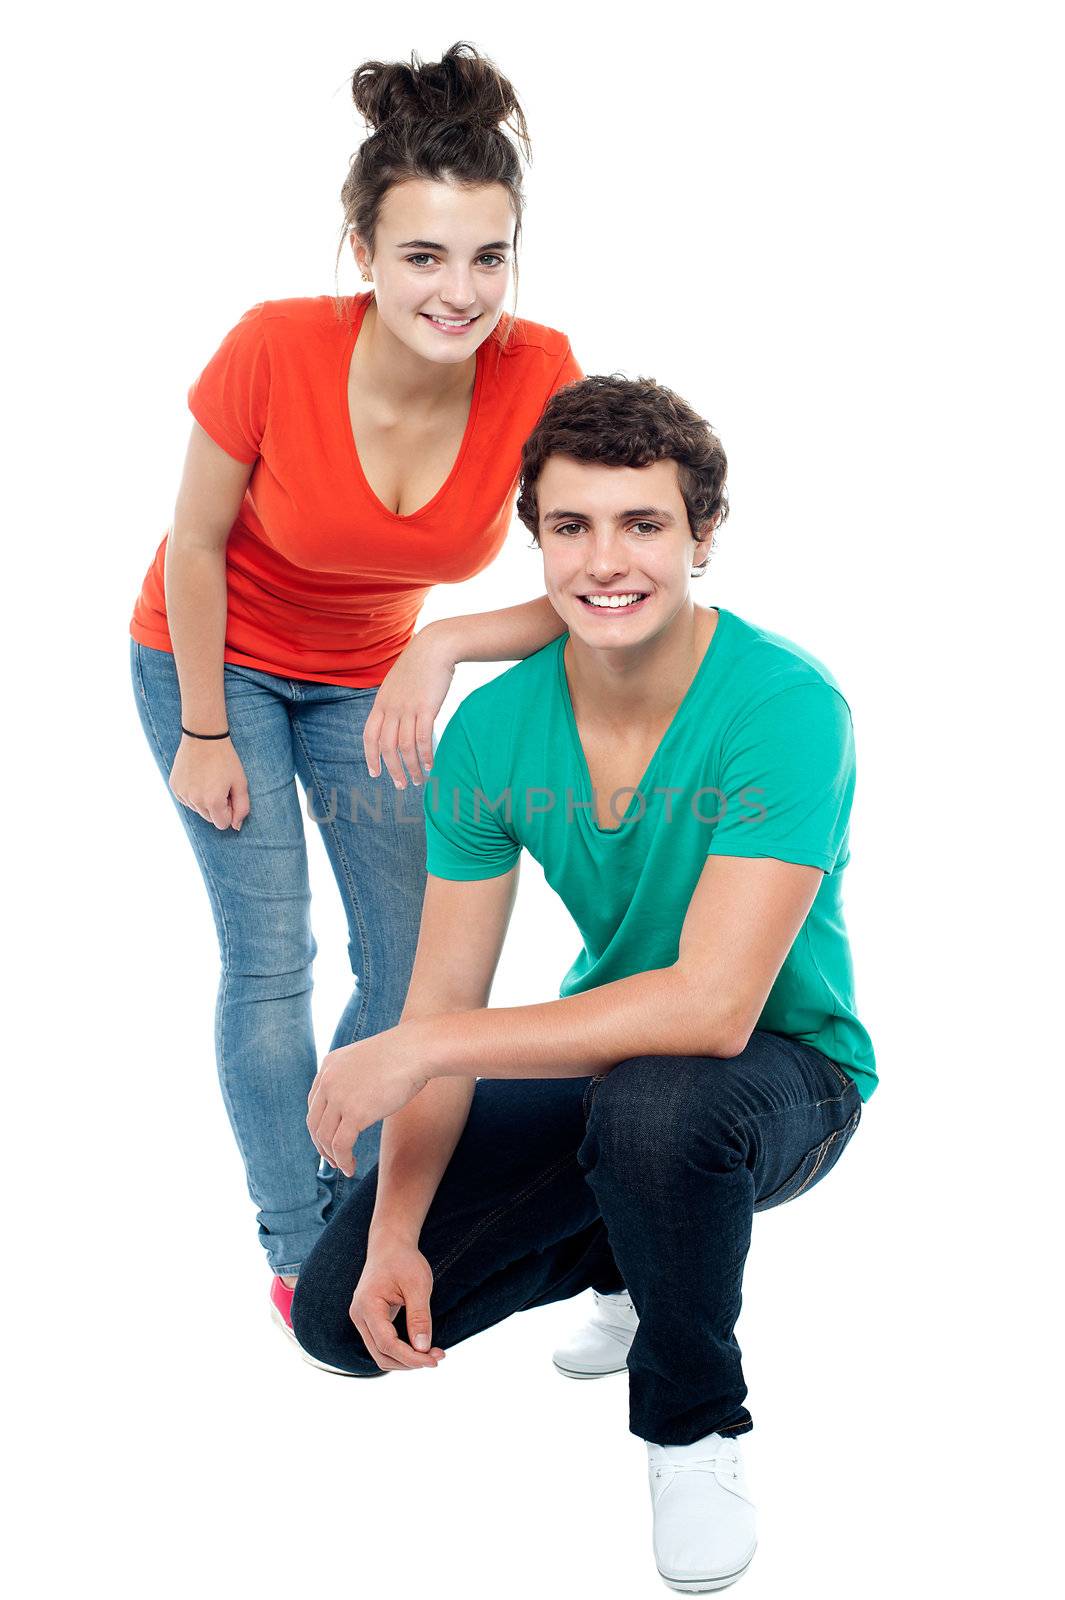 Trendy girl posing with her boyfriend. Guy in squatting posture